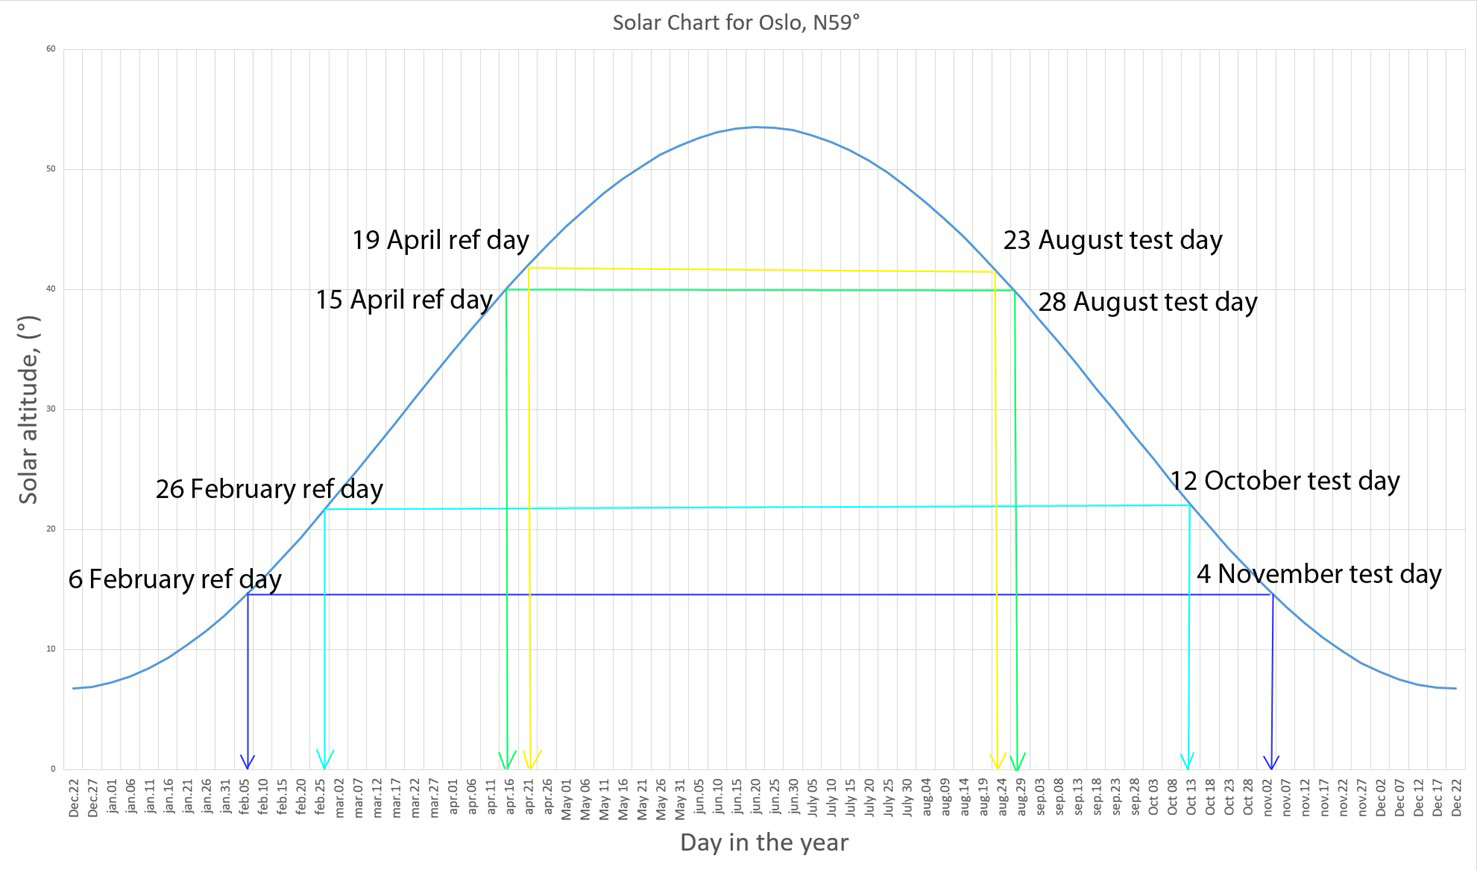 Solar altitude compatibility for test and reference pair of days used in statistical analyses.